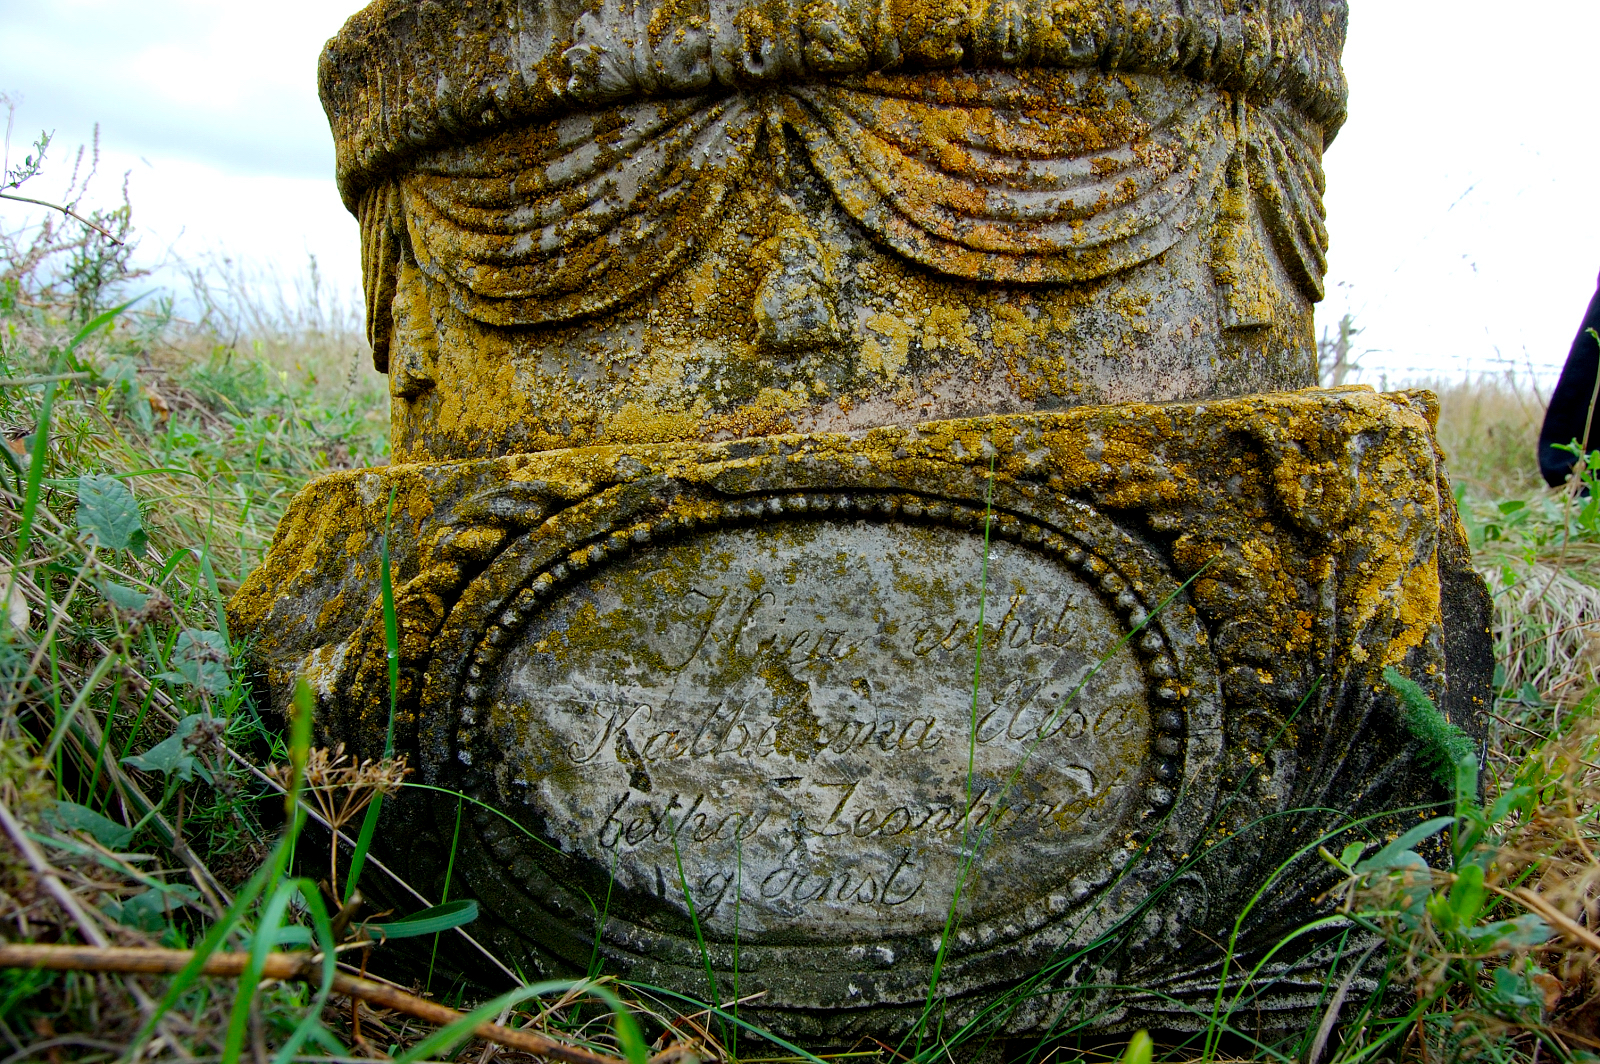 Headstone remaining in the Grimm cemetery. Courtesy of Steve Schreiber (2006).